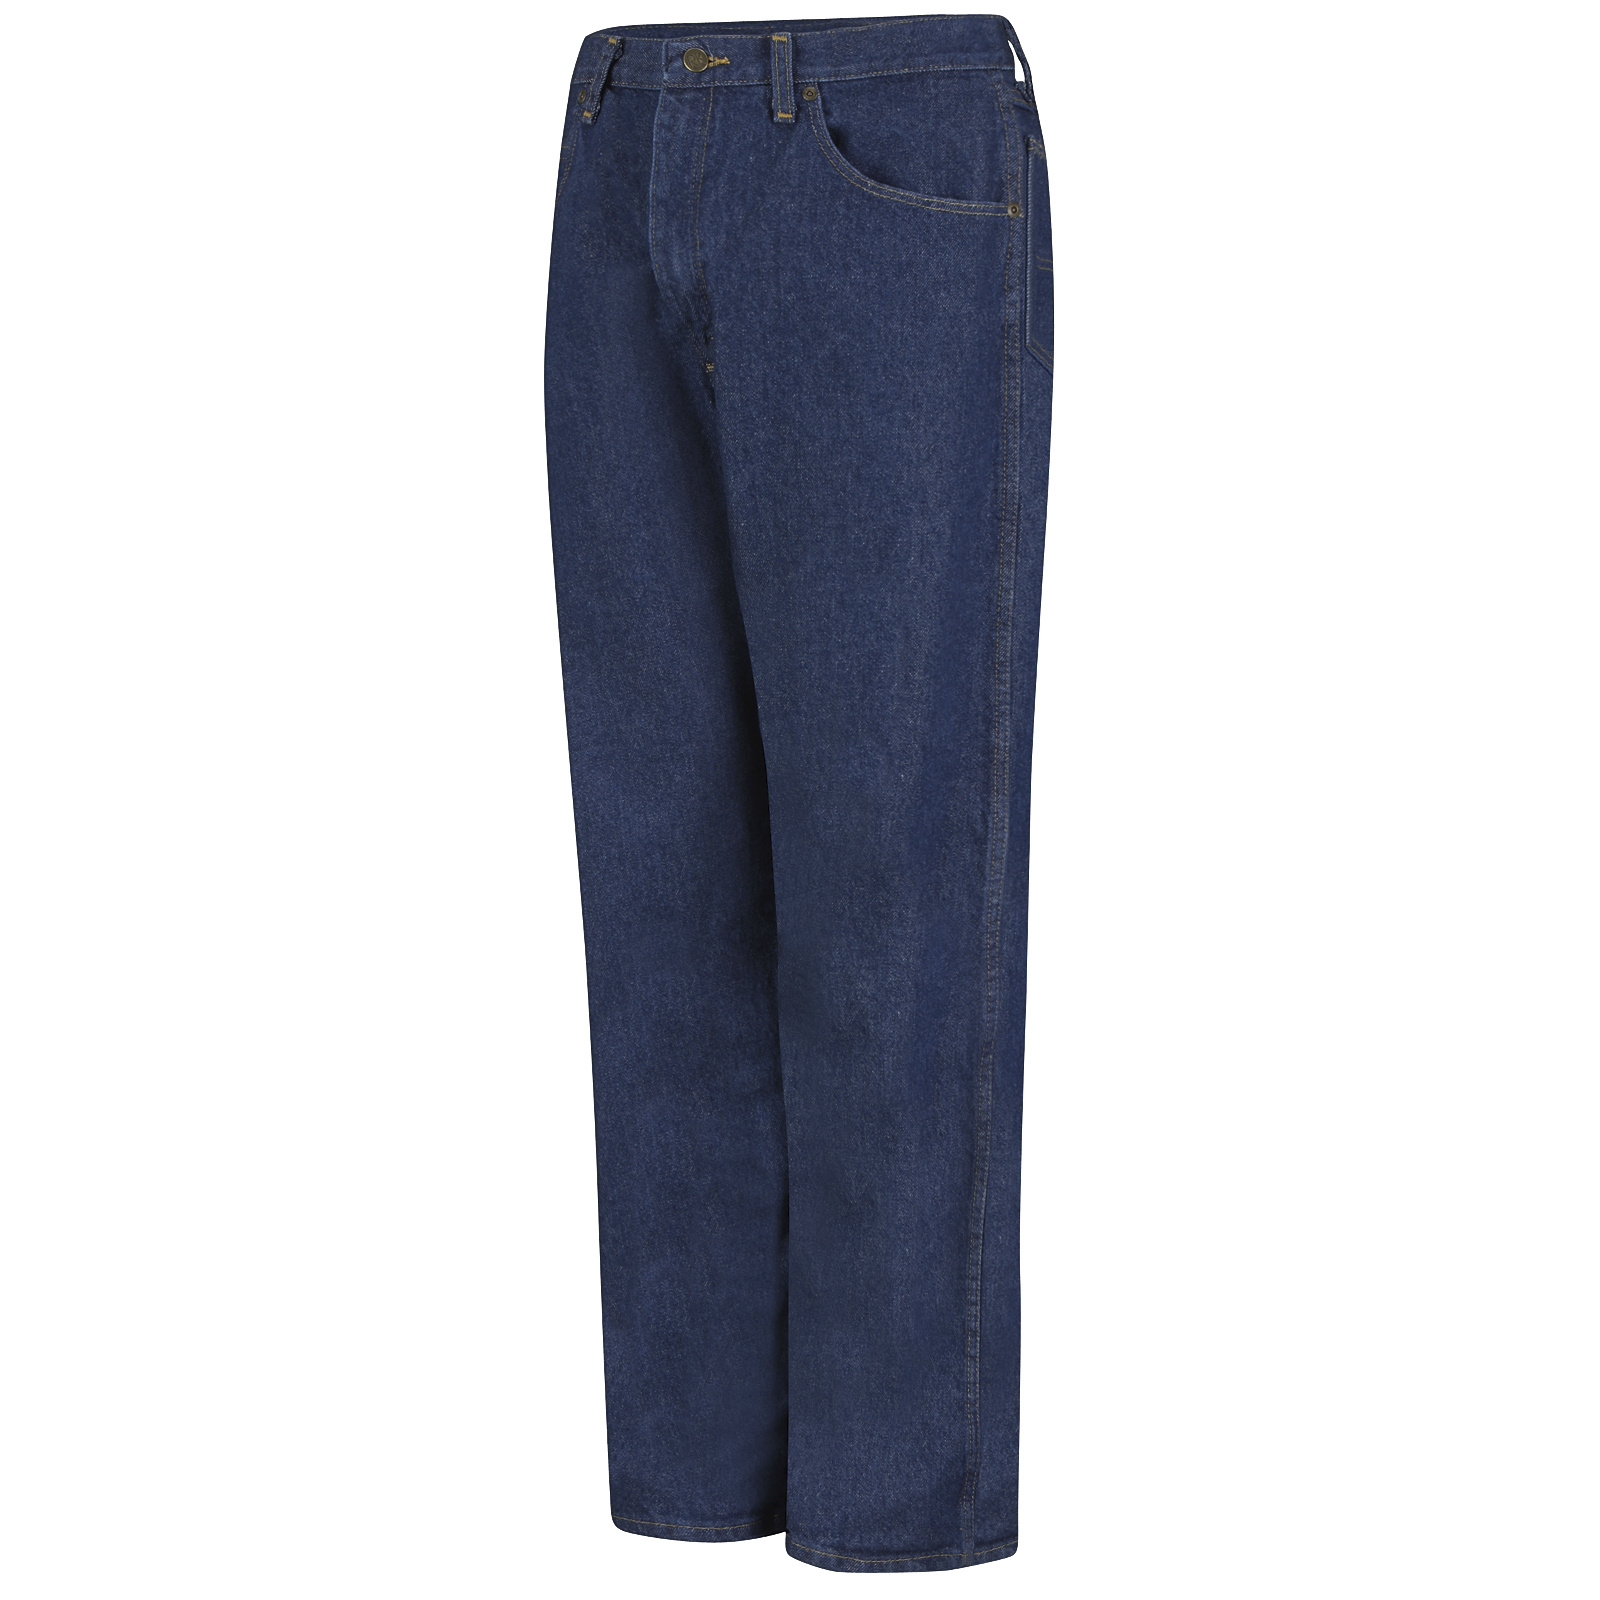 Red Kap® Men's Relaxed Fit Jean - image 1 of 2